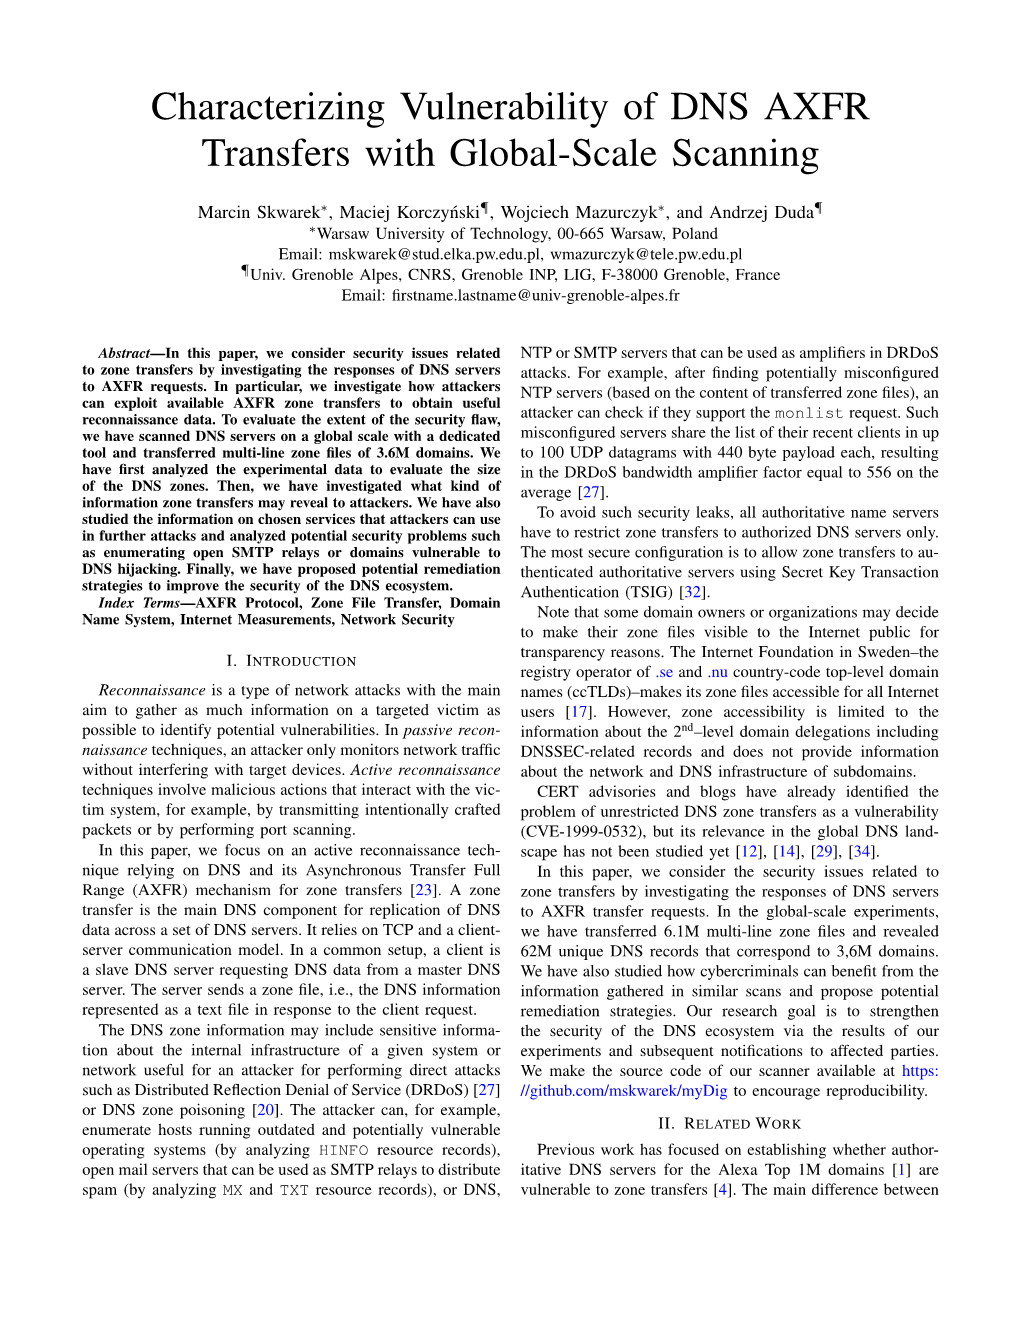 Characterizing Vulnerability of DNS AXFR Transfers with Global-Scale Scanning